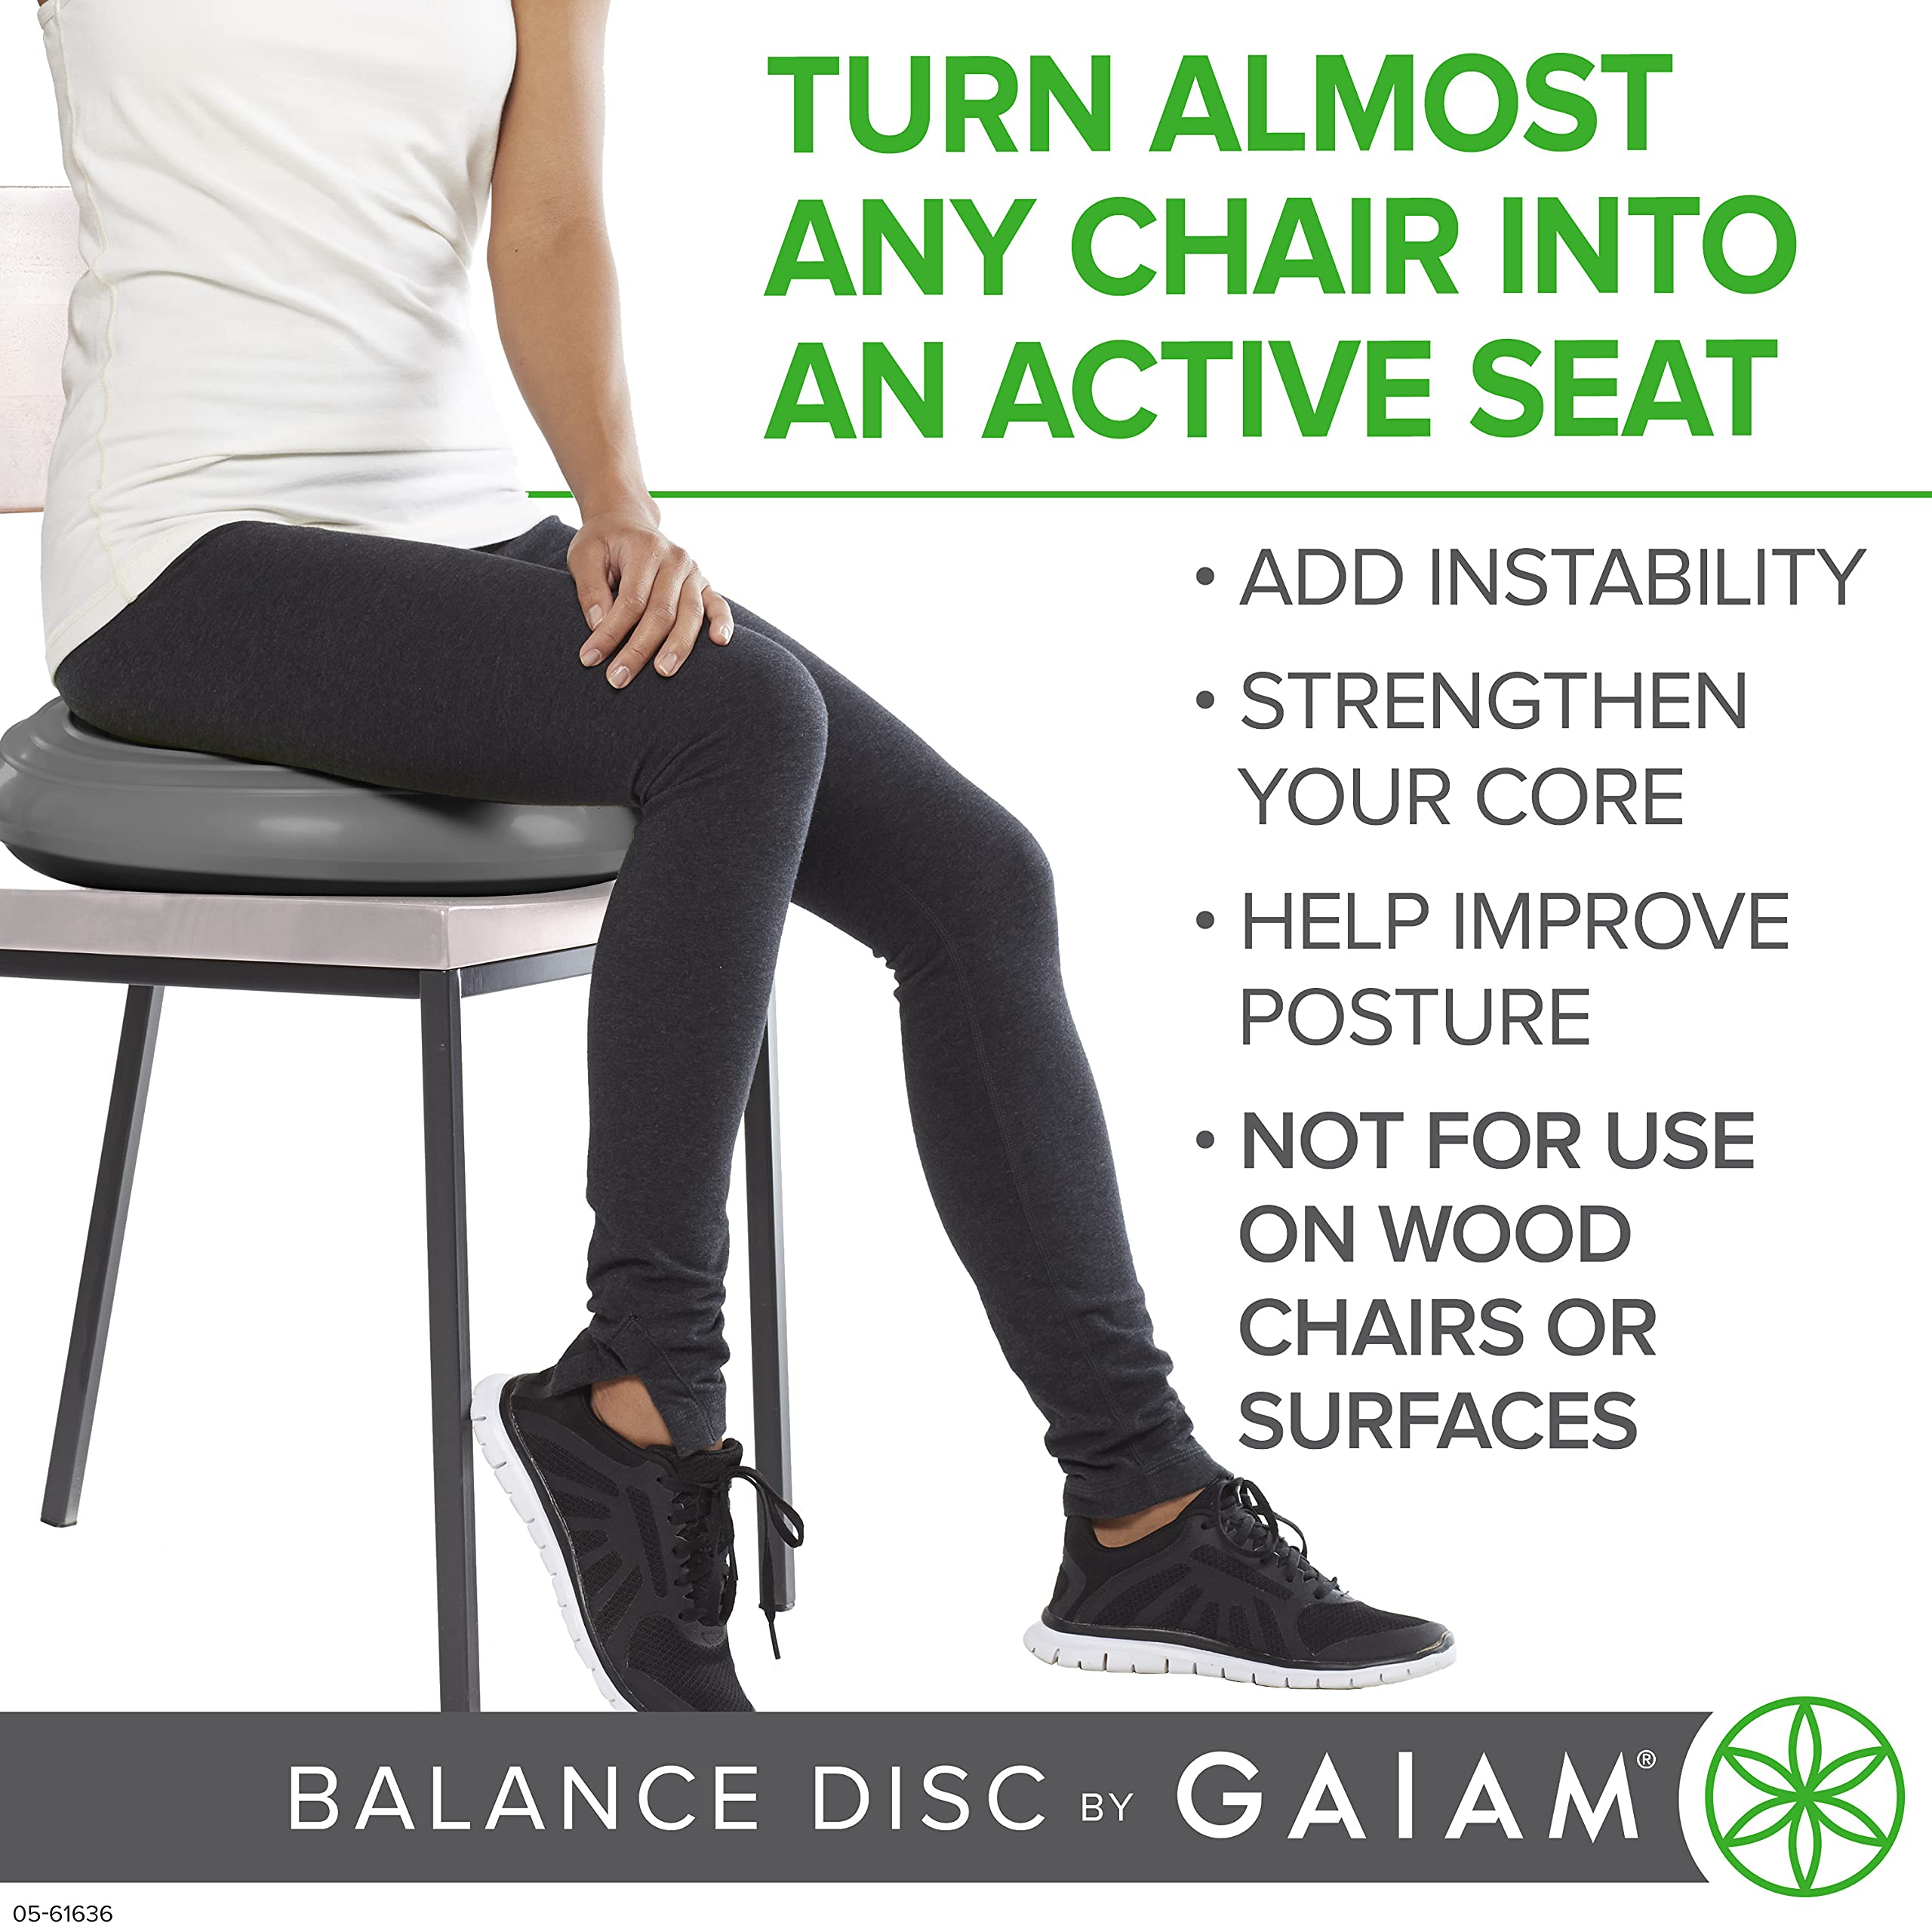 Gaiam Balance Disc Wobble Cushion Stability Core Trainer For Home Or Office Desk Chair and Kids Alternative Classroom Sensory Wi